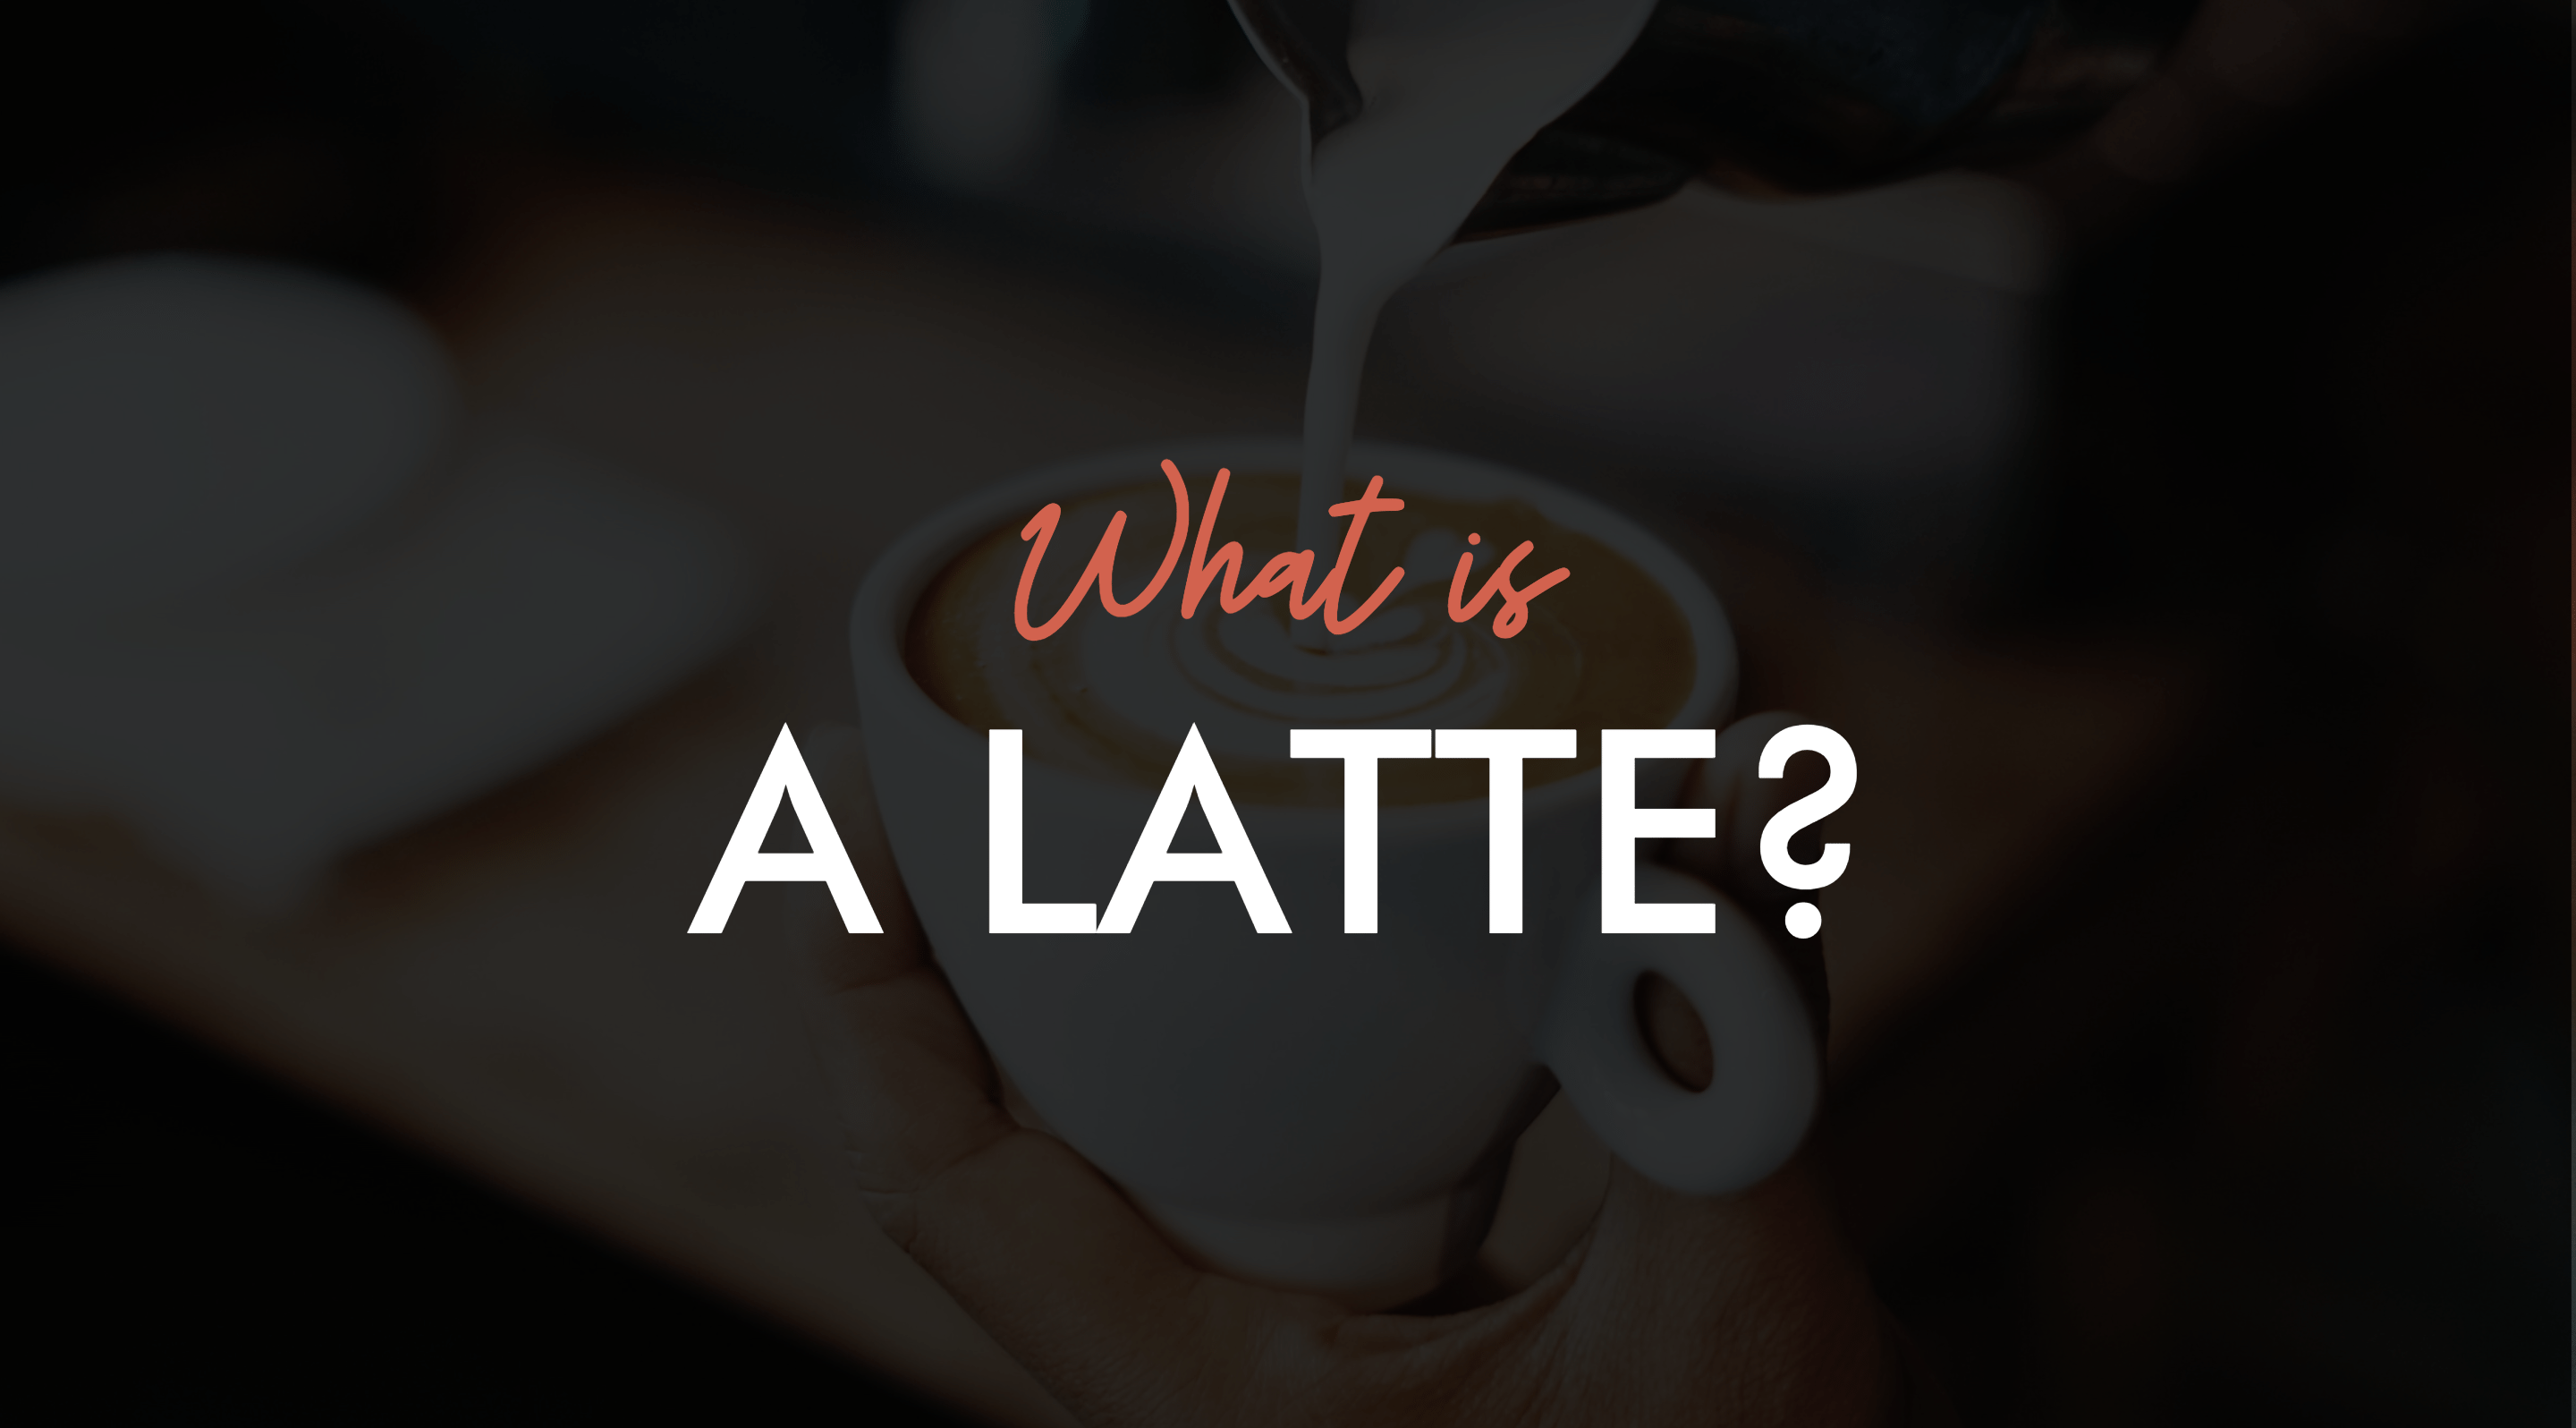 What is a Latte?